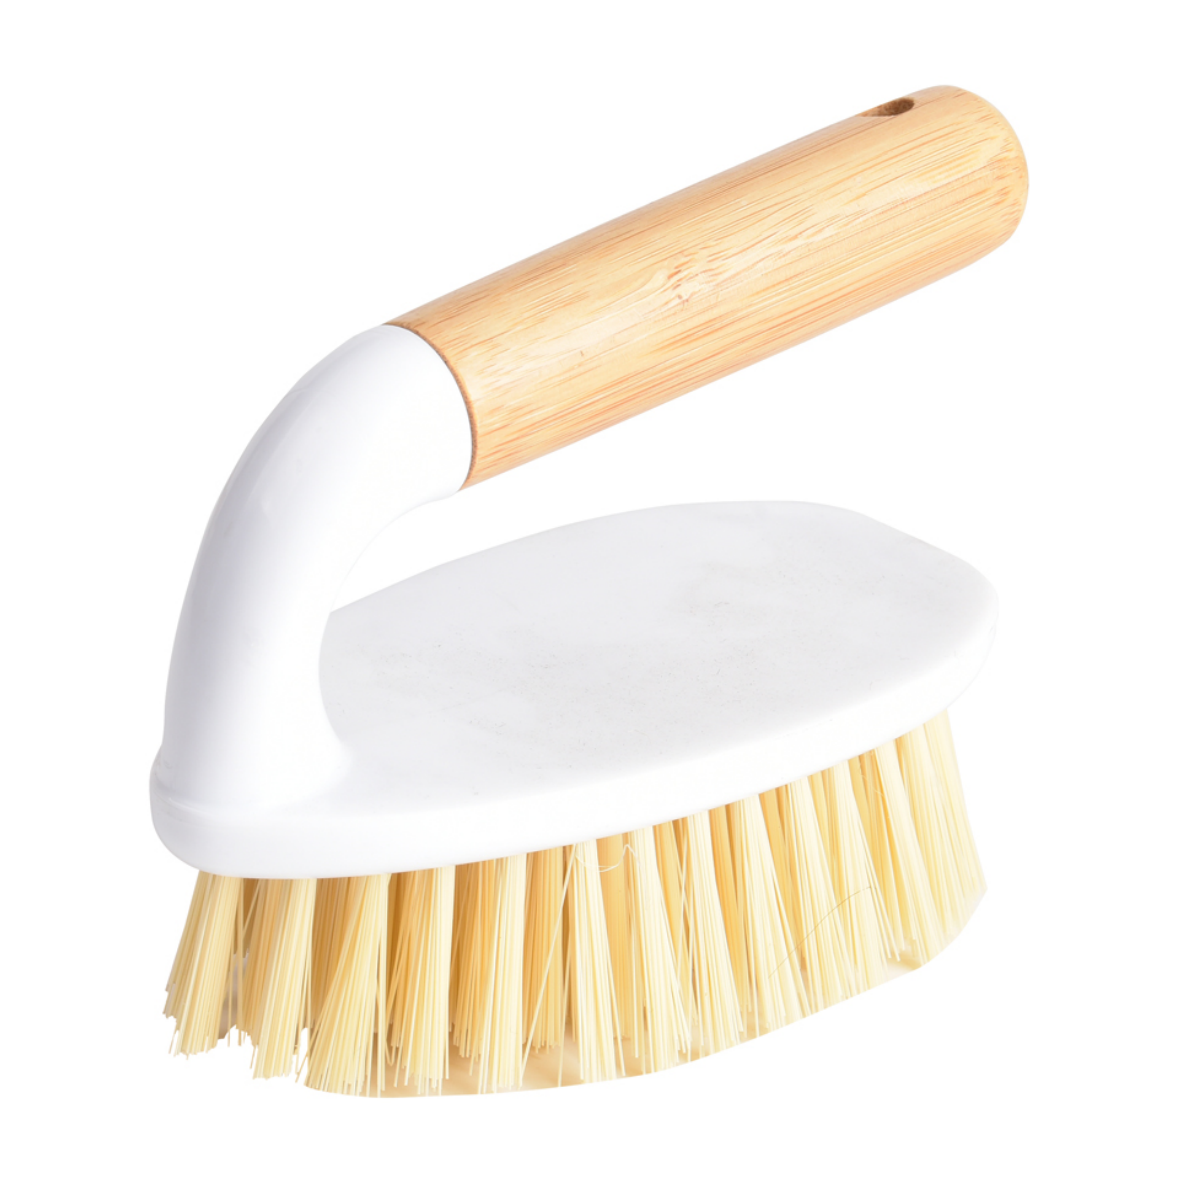 Scrub Brush for Cleaning with Bamboo Handle2